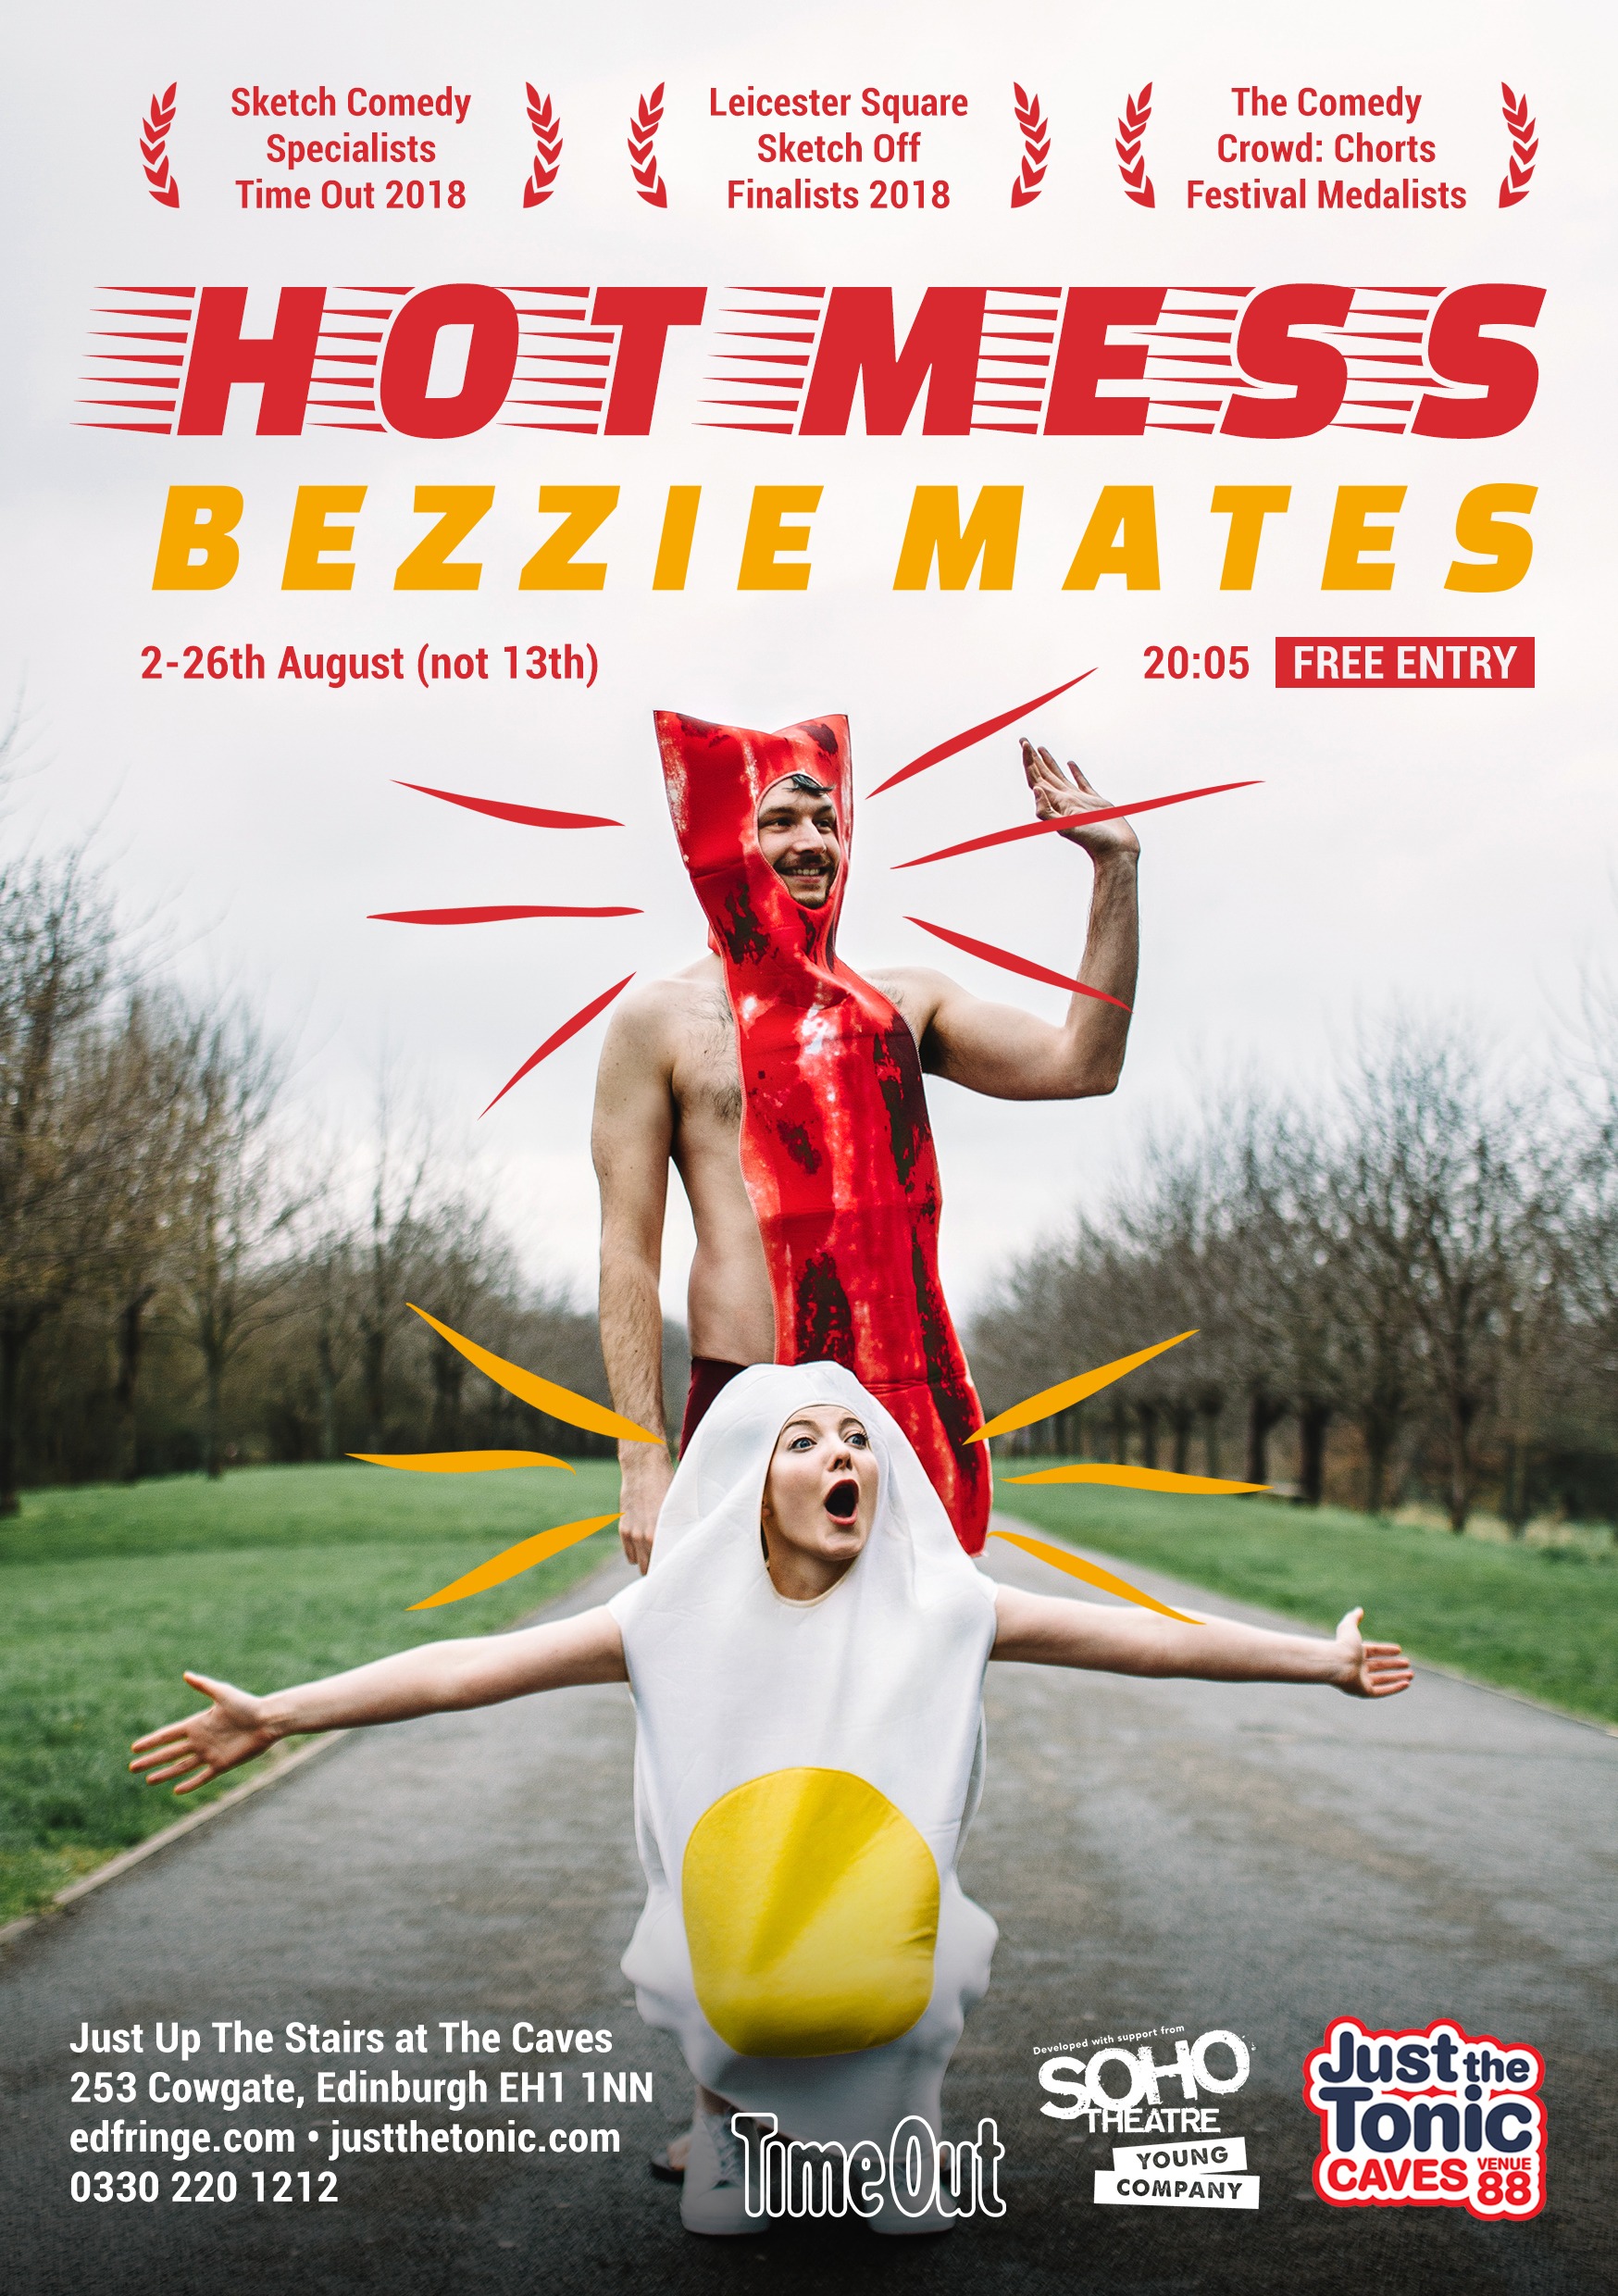 The poster for Hot Mess: Bezzie Mates